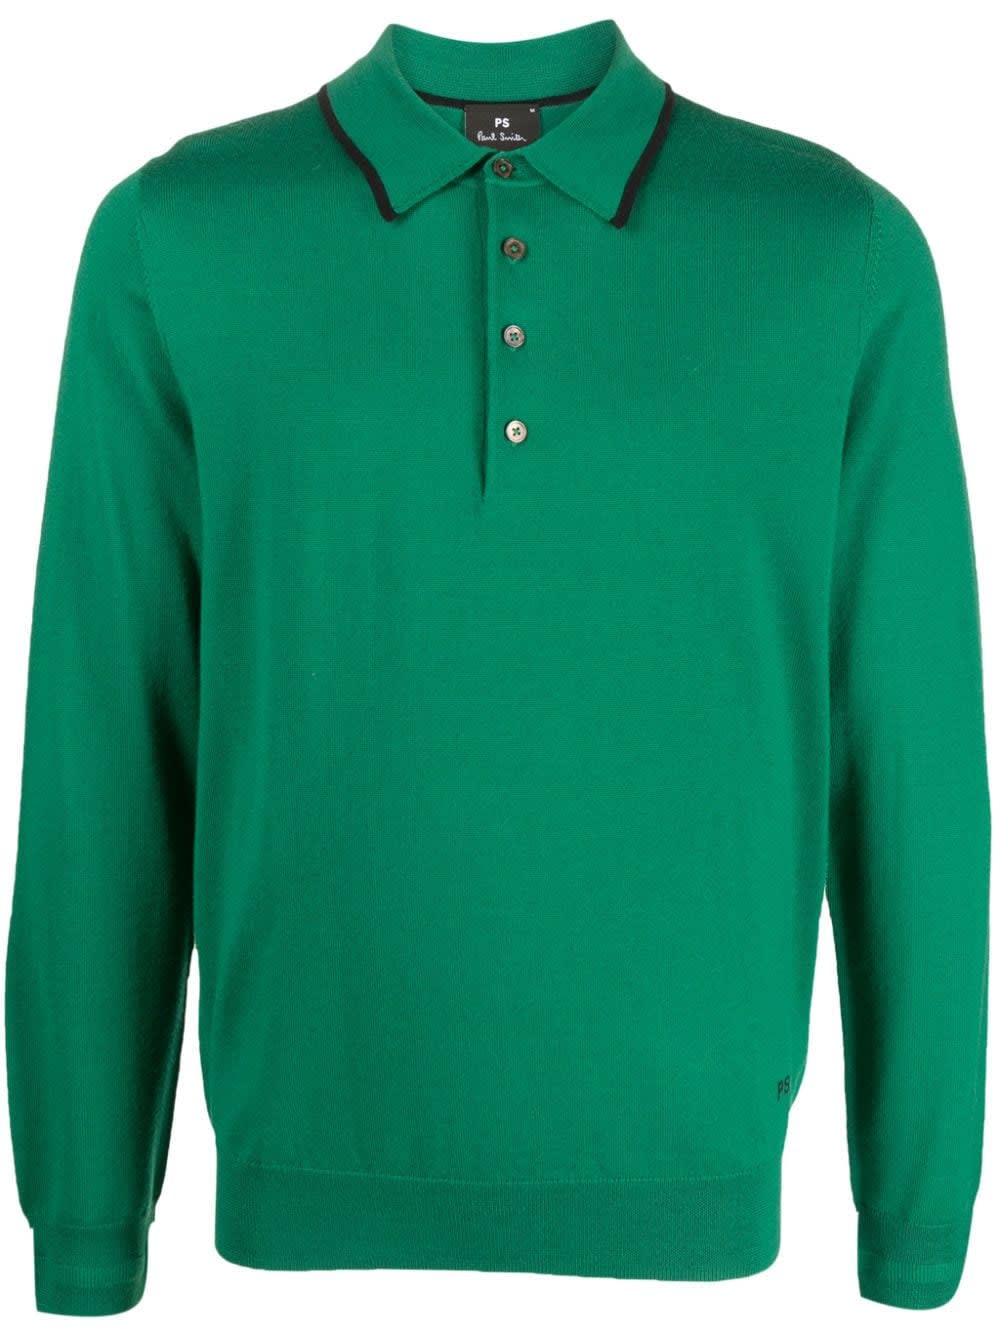 Shop Ps By Paul Smith Mens Sweater Long Sleeves Polo In Emerald Green